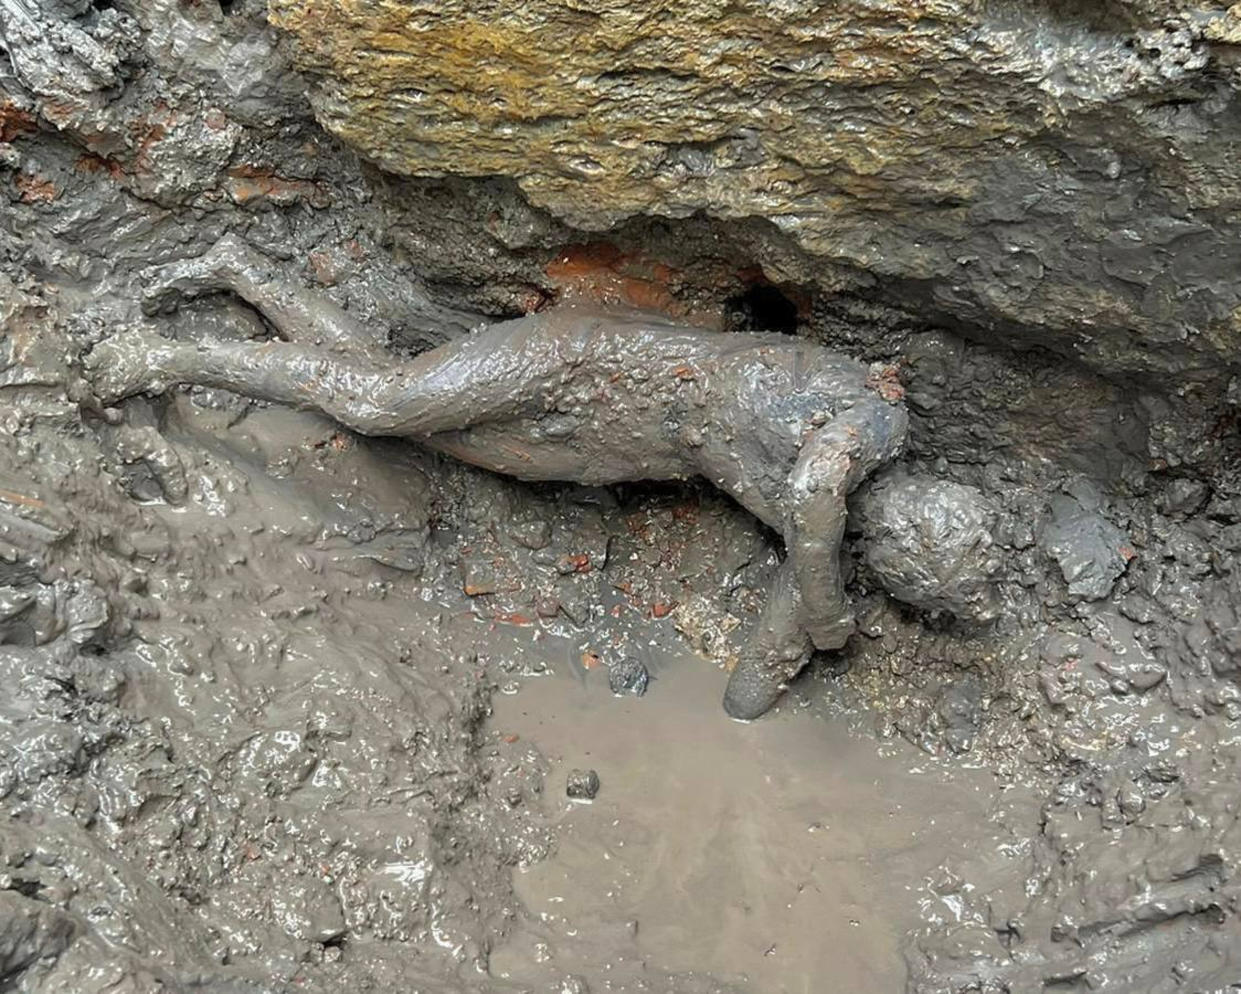 A statue is seen at the site of the discovery of two dozen well-preserved bronze statues from an ancient Tuscan thermal spring in San Casciano dei Bagni, central Italy, in this undated photo made available by the Italian Culture Ministry, Thursday, Nov. 3, 2022. (Italian Culture Ministry via AP)